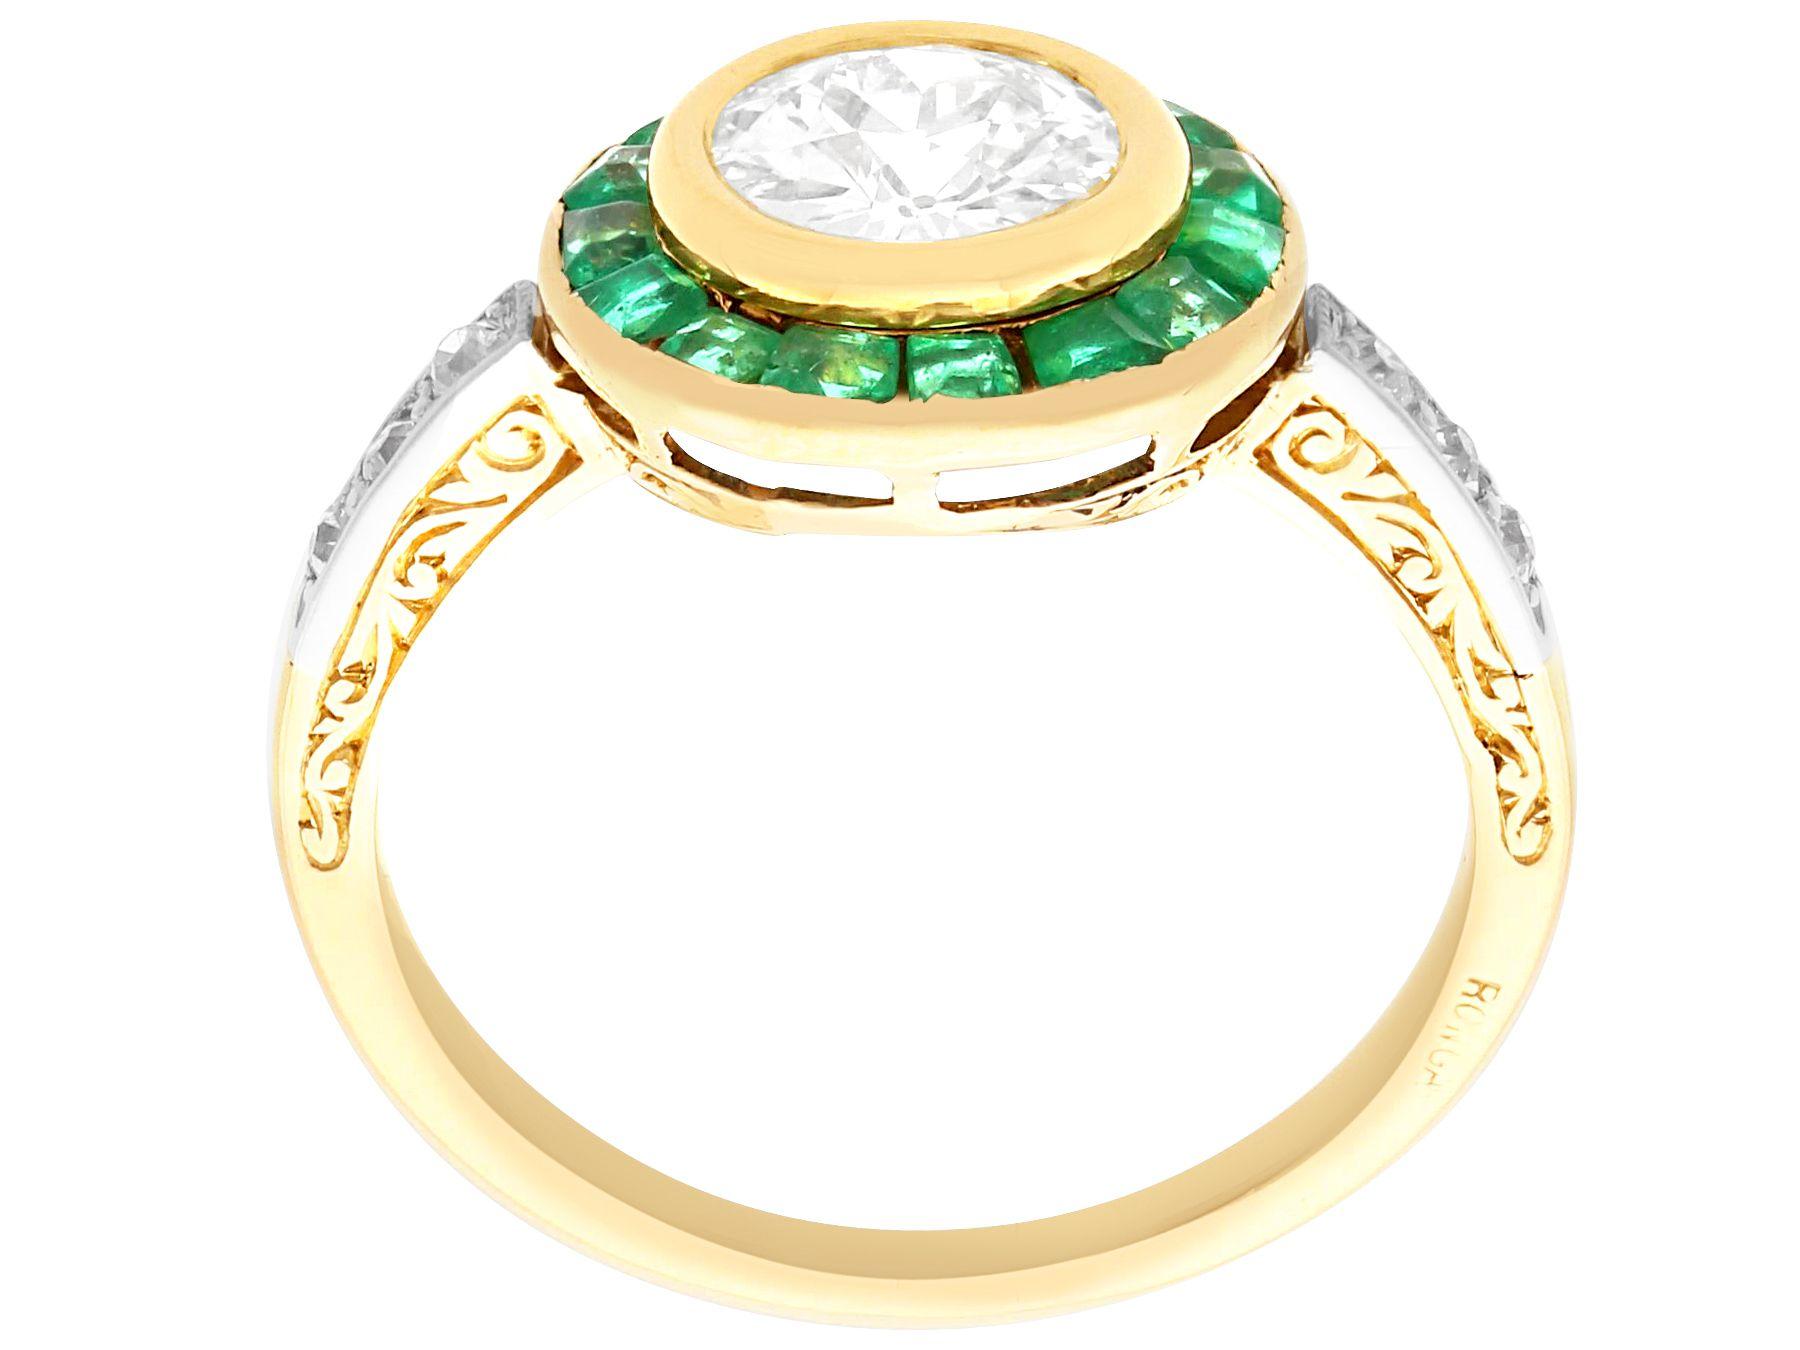 Antique 1.05Ct Emerald 1.18Ct Diamond Yellow Gold Ring, Circa 1930 In Excellent Condition For Sale In Jesmond, Newcastle Upon Tyne